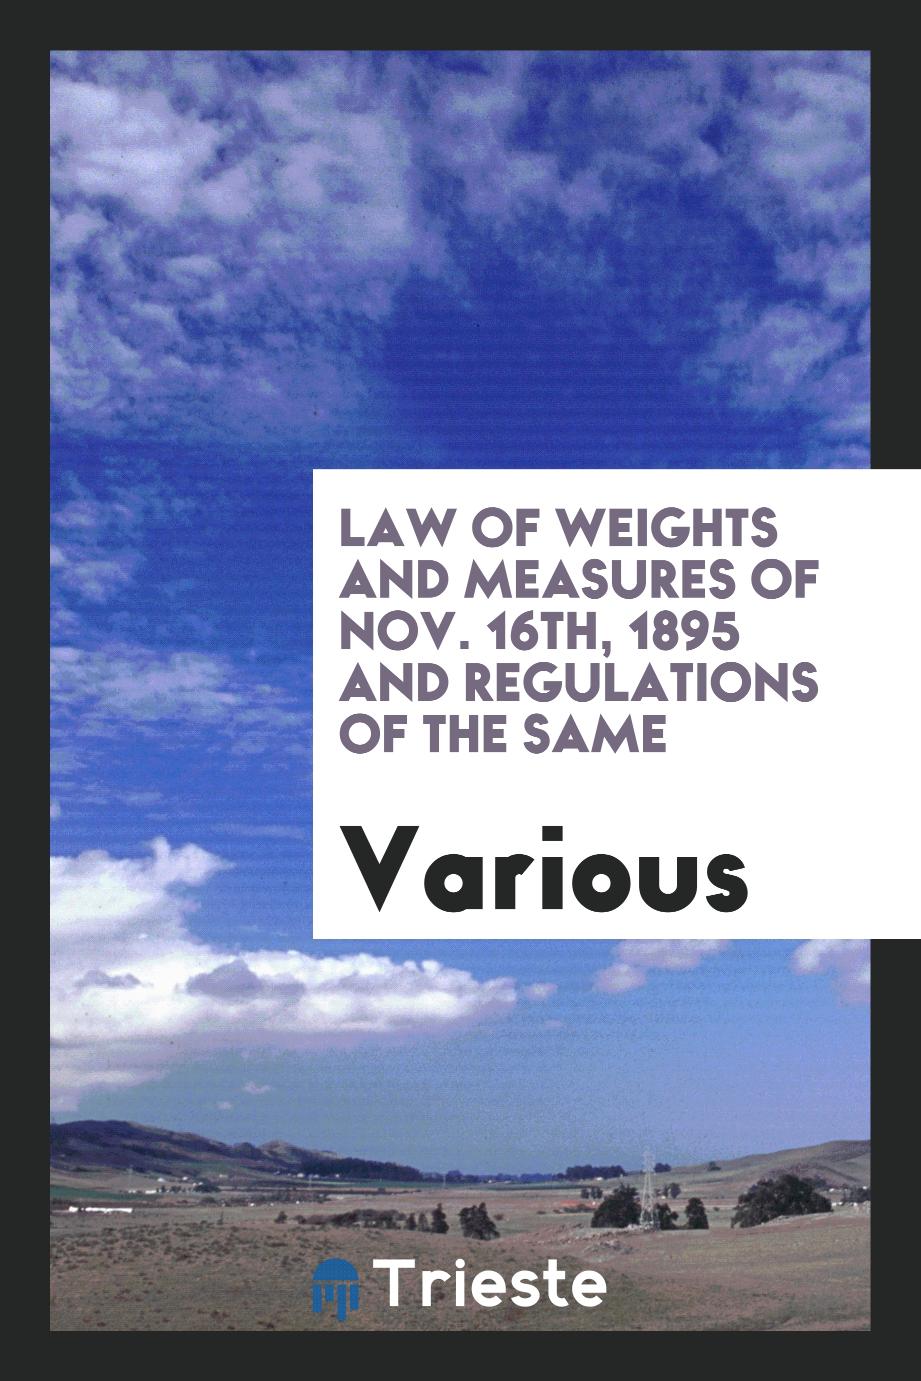 Law of Weights and Measures of Nov. 16th, 1895 and Regulations of the Same